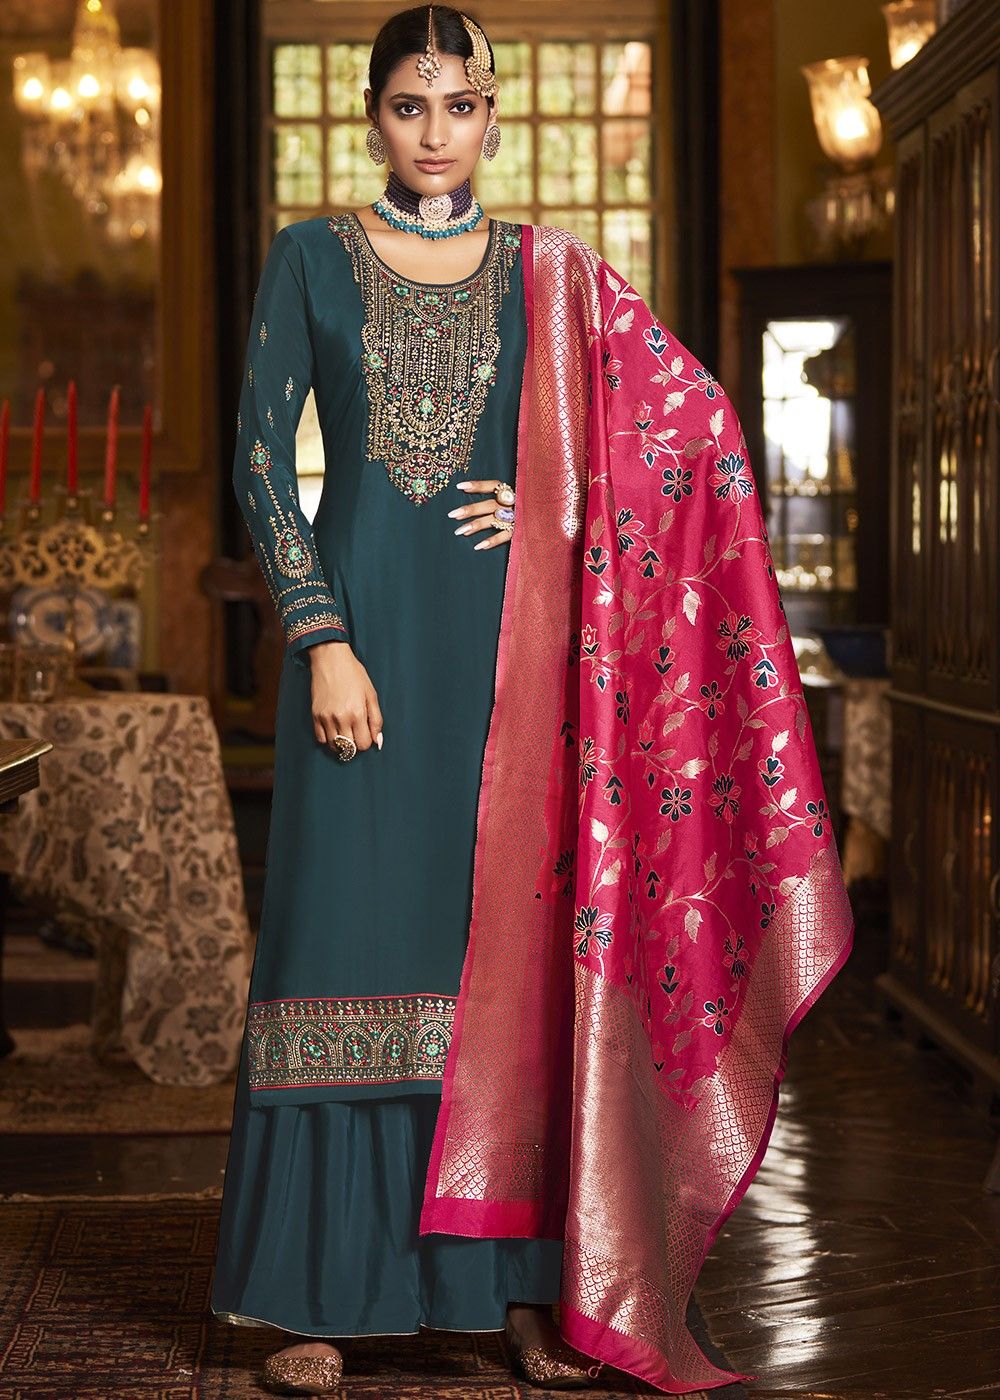 Women's Look Stunning With Peacock Blue Color Bridal Sharara Suit